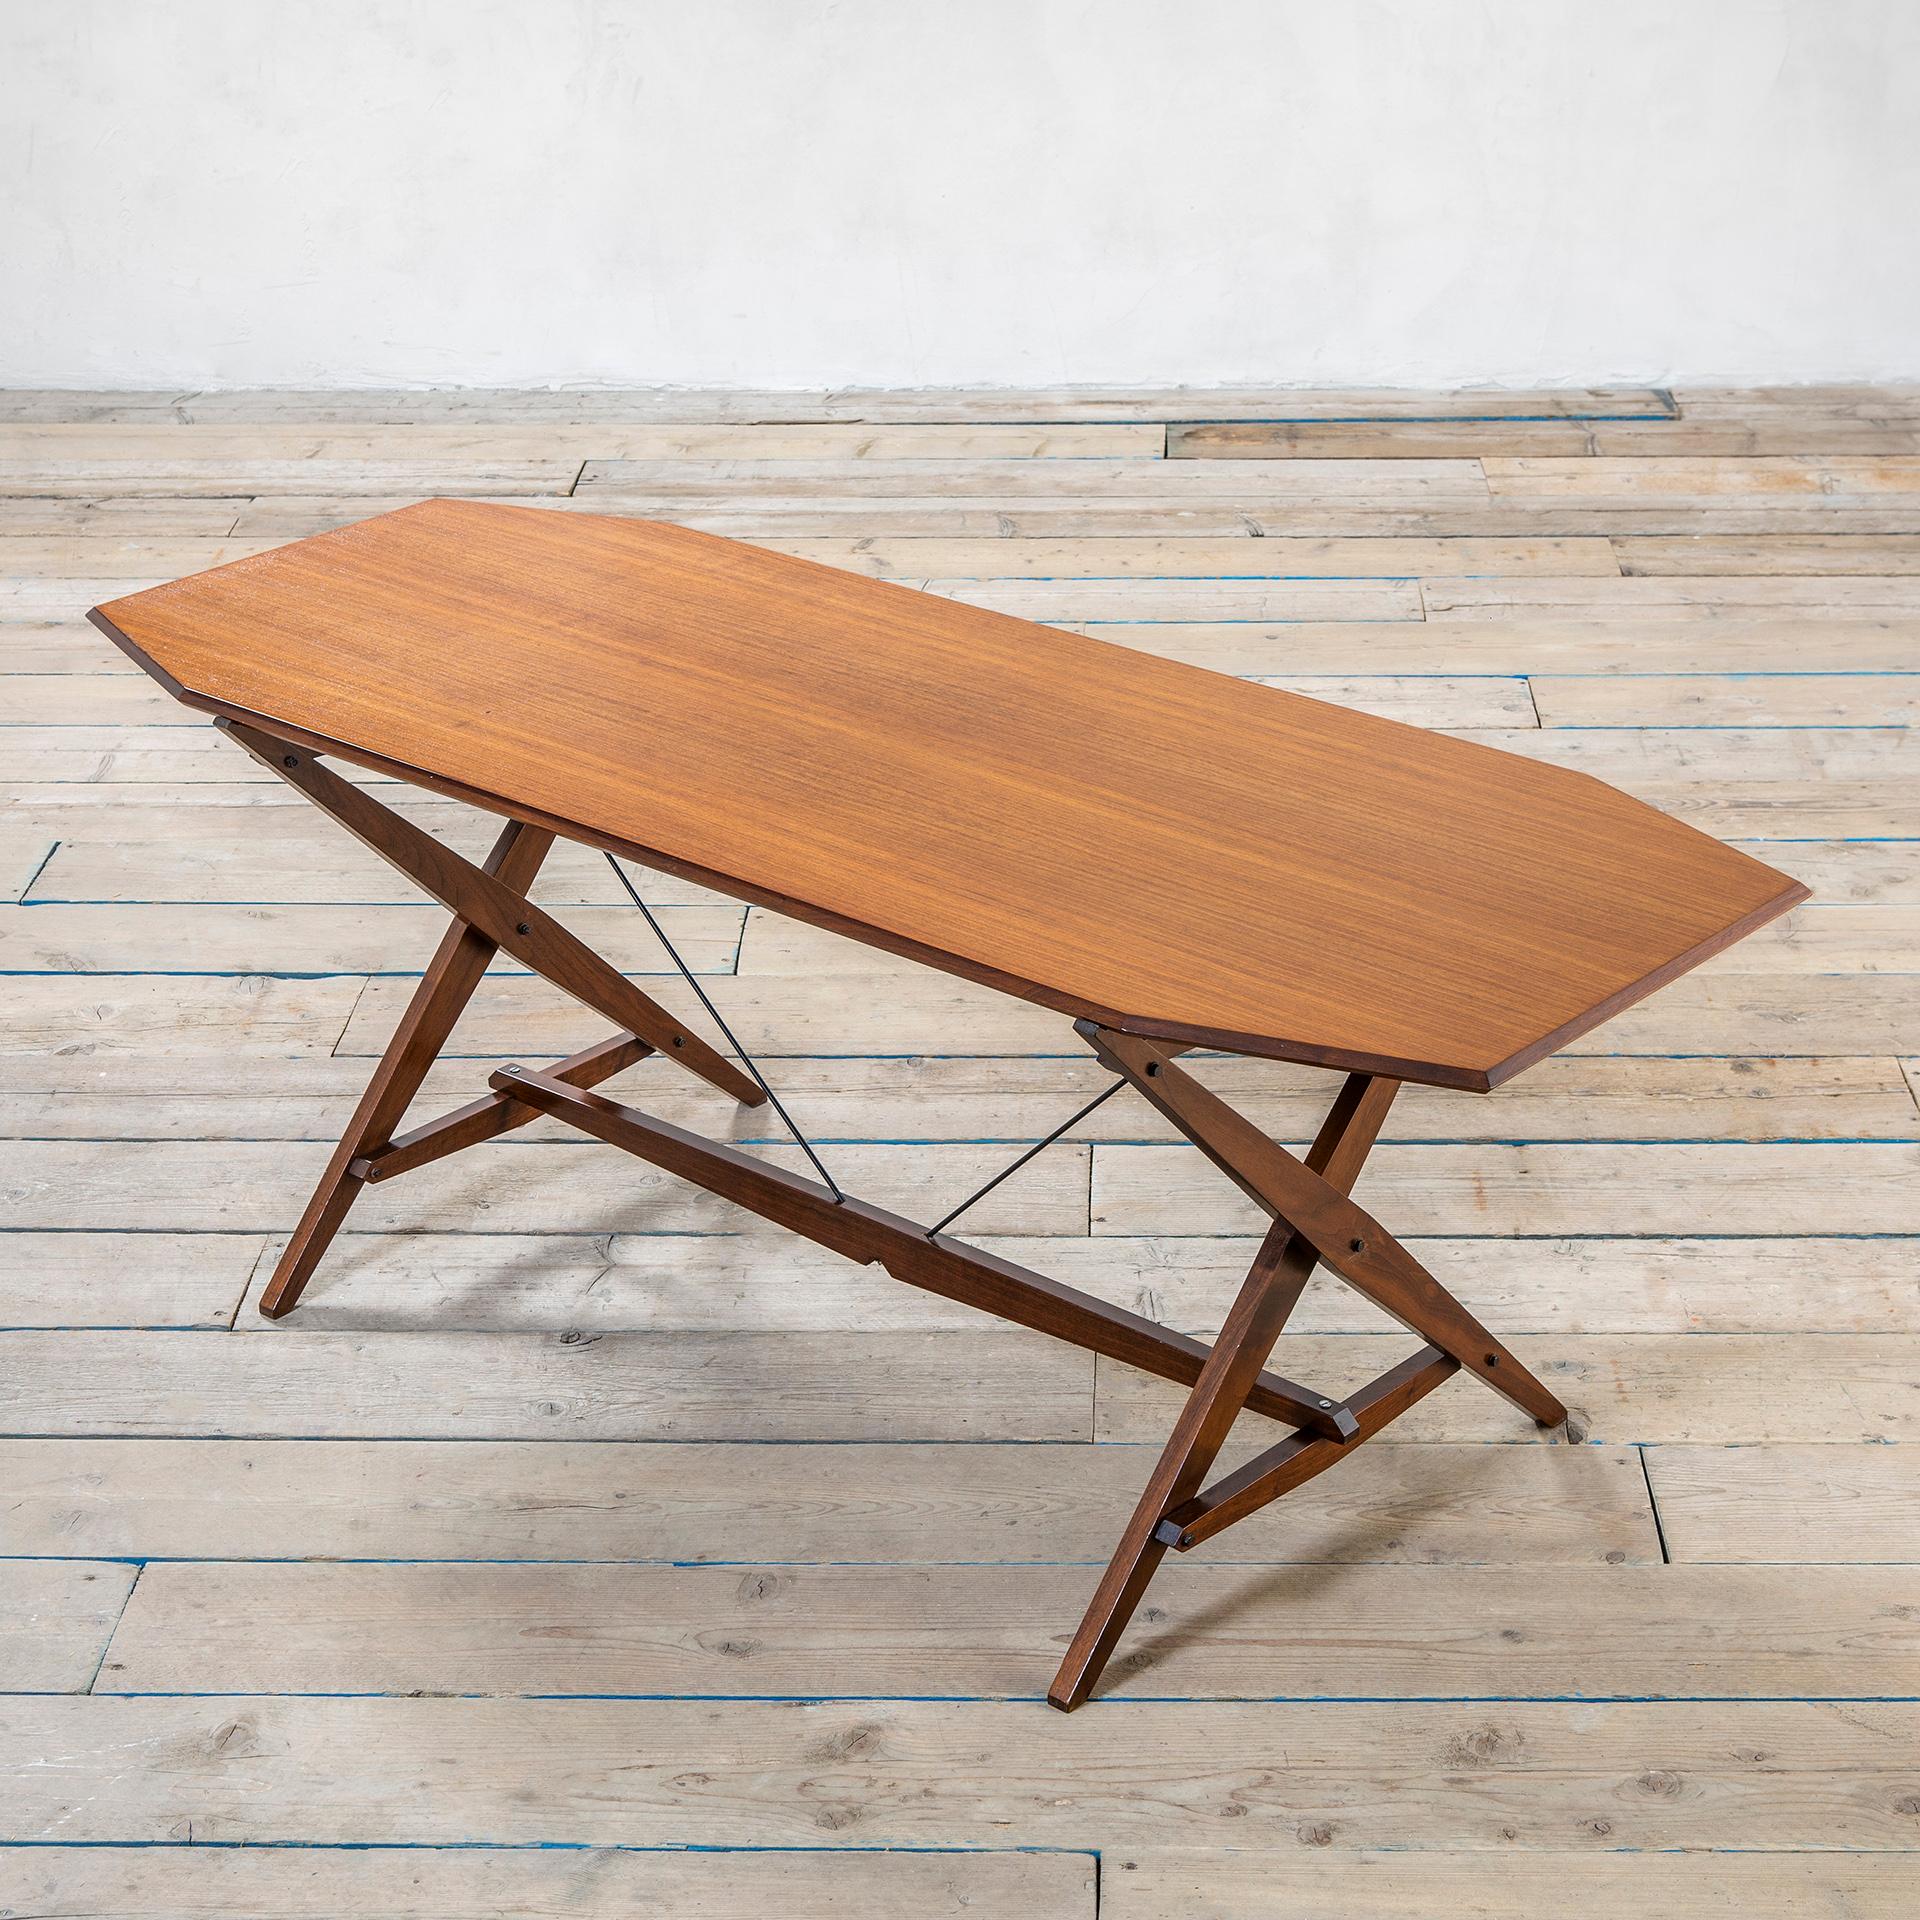 Iconic table designed by the great Italian maestro Franco Albini in the 50s. The model is TL2 better known as 